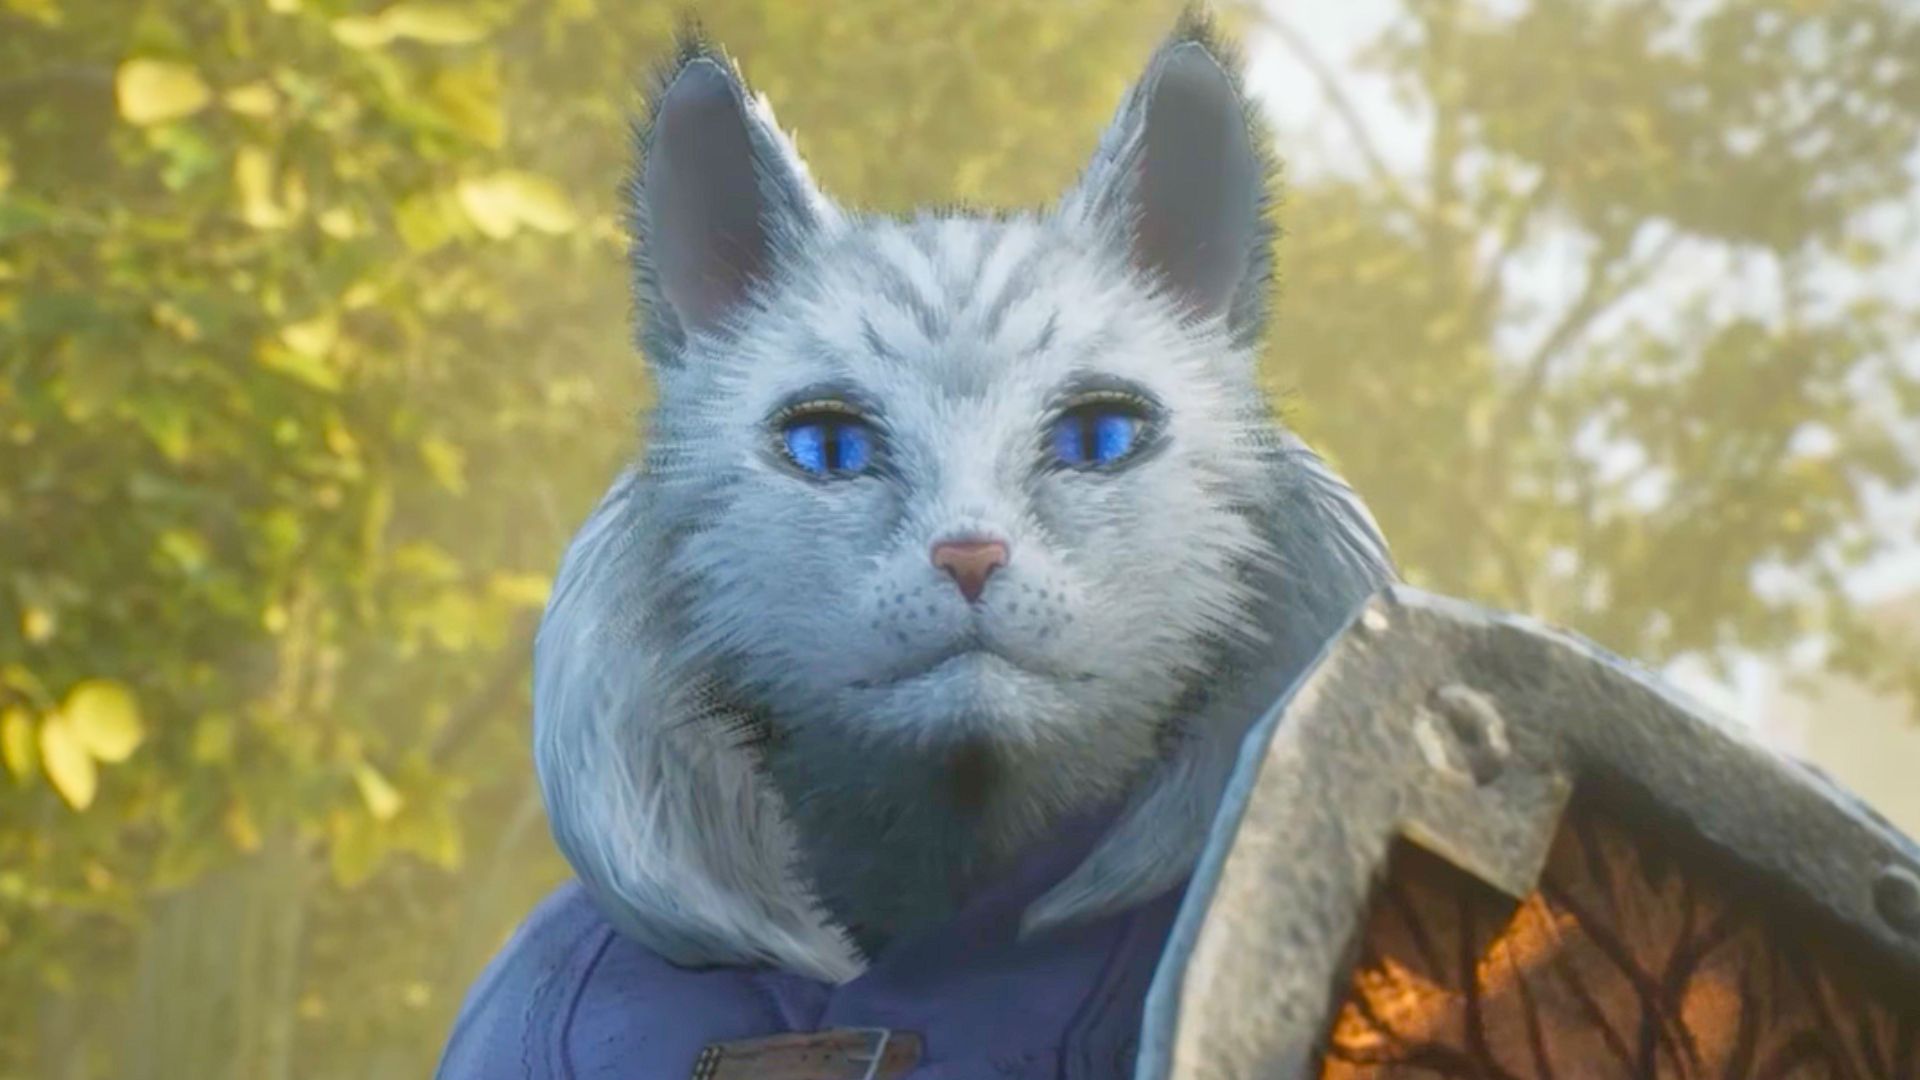 New RPG is Dark Souls but with cats, and it's on Steam real soon